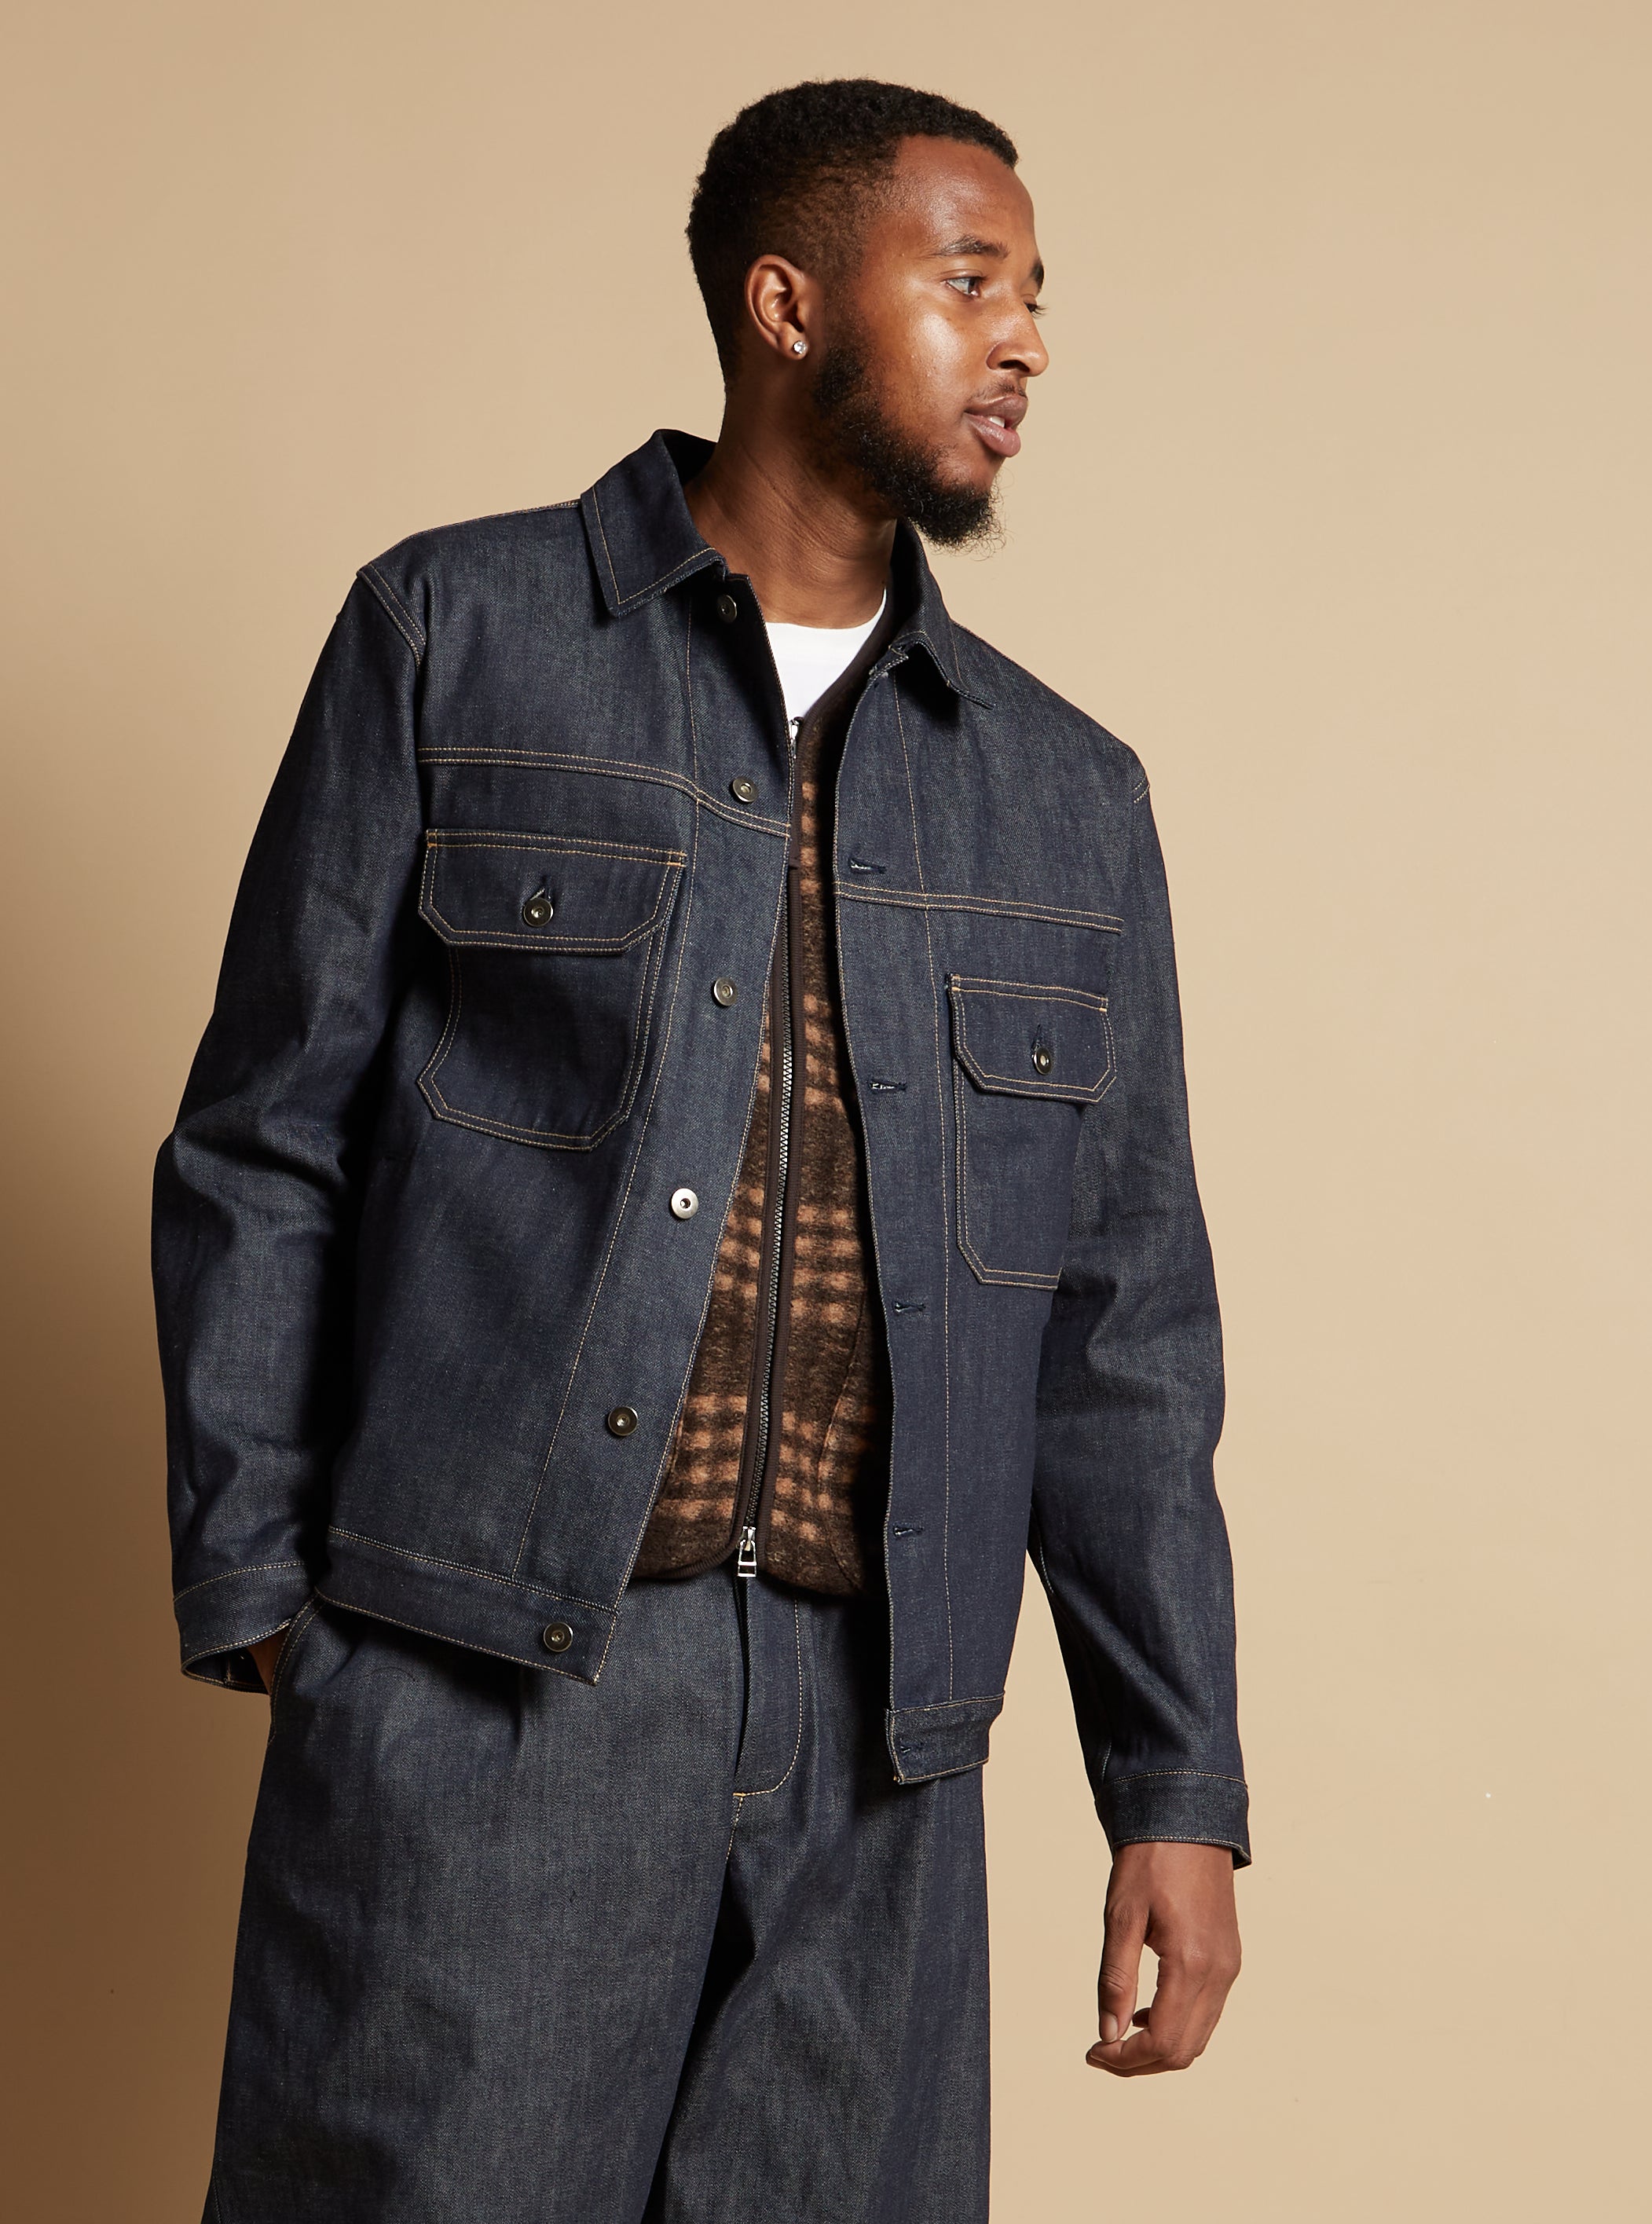 Tellason Made in USA Men's Blanket Lined 16.5 oz Japanese Kaihara Raw  Selvedge Denim Jean Jacket (Small) : Buy Online at Best Price in KSA - Souq  is now Amazon.sa: Fashion